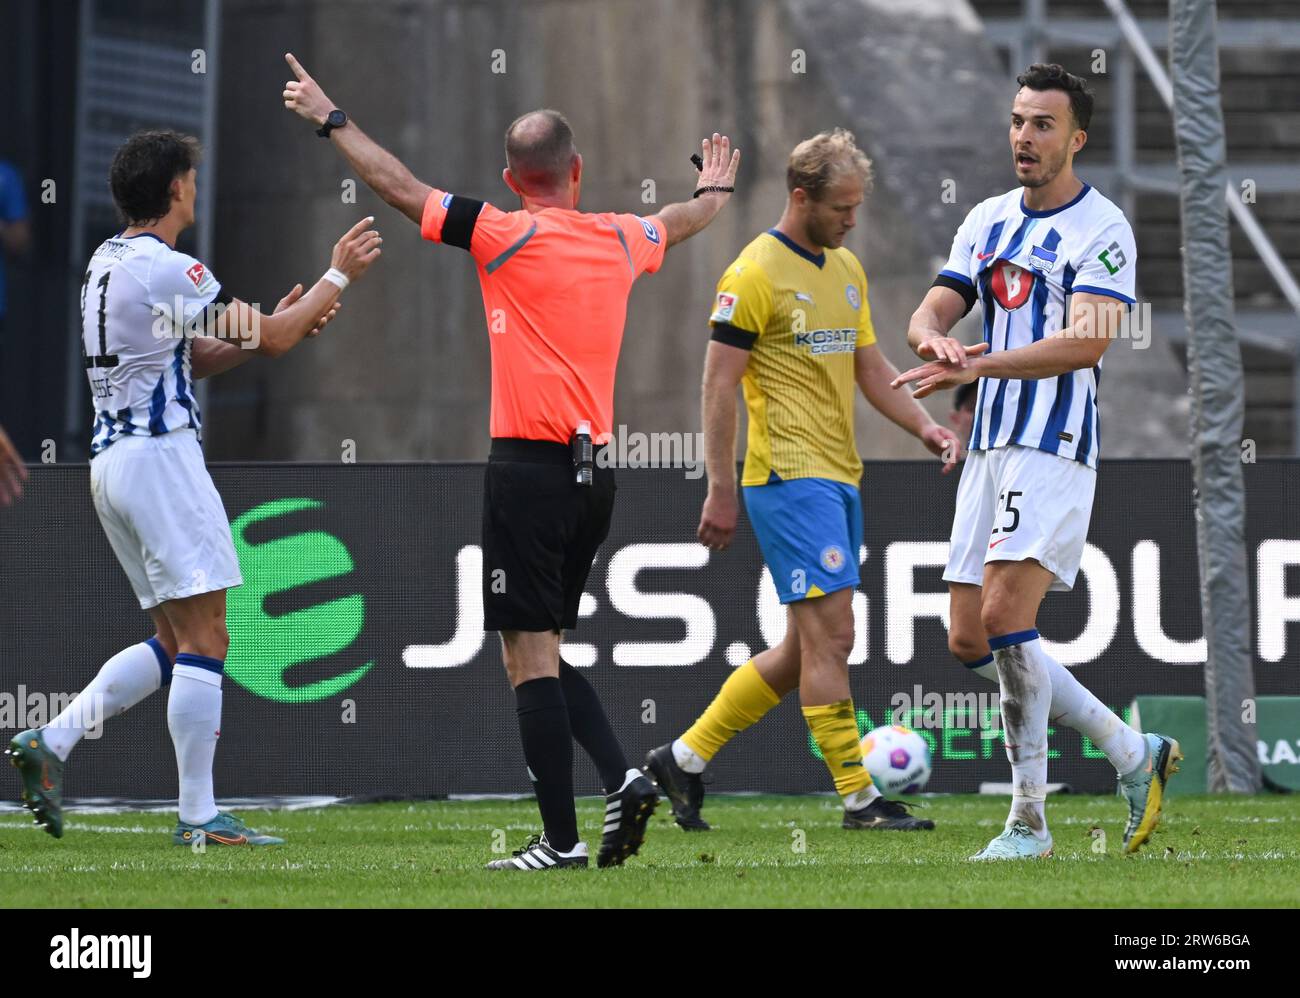 17 September 2023, Berlin: Soccer: 2. Bundesliga, Hertha BSC - Eintracht Braunschweig, Matchday 6, Olympiastadion, Hertha's Fabian Reese (l) and Haris Tabakovic (r) complain to referee Marco Fritz (M) about handball in the Braunschweig penalty area. After video evidence, the referee awards a penalty. Photo: Soeren Stache/dpa - IMPORTANT NOTE: In accordance with the requirements of the DFL Deutsche Fußball Liga and the DFB Deutscher Fußball-Bund, it is prohibited to use or have used photographs taken in the stadium and/or of the match in the form of sequence pictures and/or video-like photo ser Stock Photo